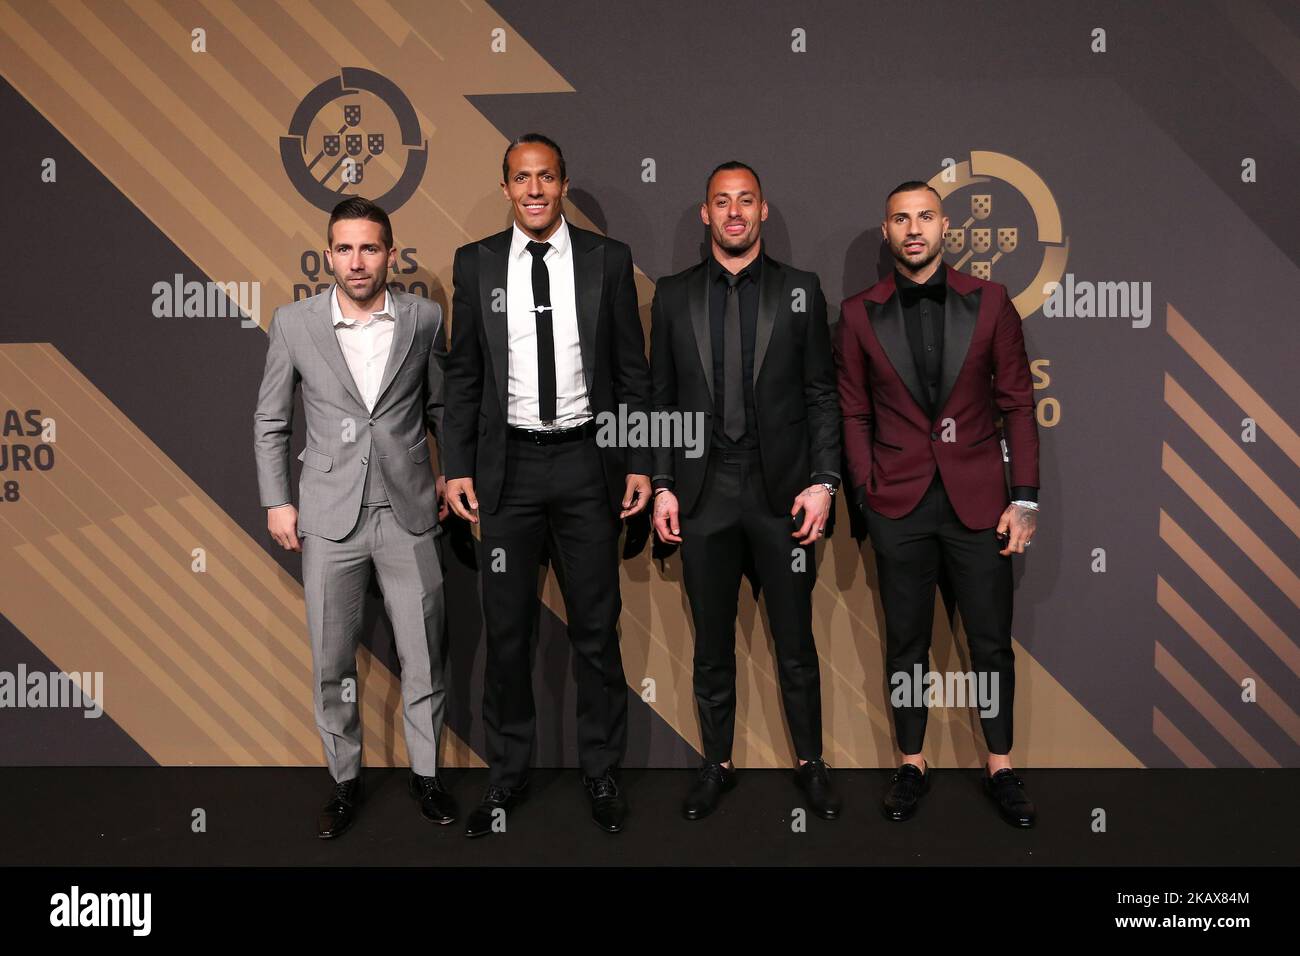 Portugal midfielder Joao Moutinho (L) with Portugals defender Bruno Alves (CL) and Portugals goalkeeper Beto (CR) with Portugals forward Ricardo Quaresma (R) poses on arrival at 'Quinas de Ouro' 2018 ceremony held and the Pavilhao Carlos Lopes in Lisbon, Portugal on March 19, 2018. (Photo by Bruno Barros / DPI / NurPhoto) Stock Photo